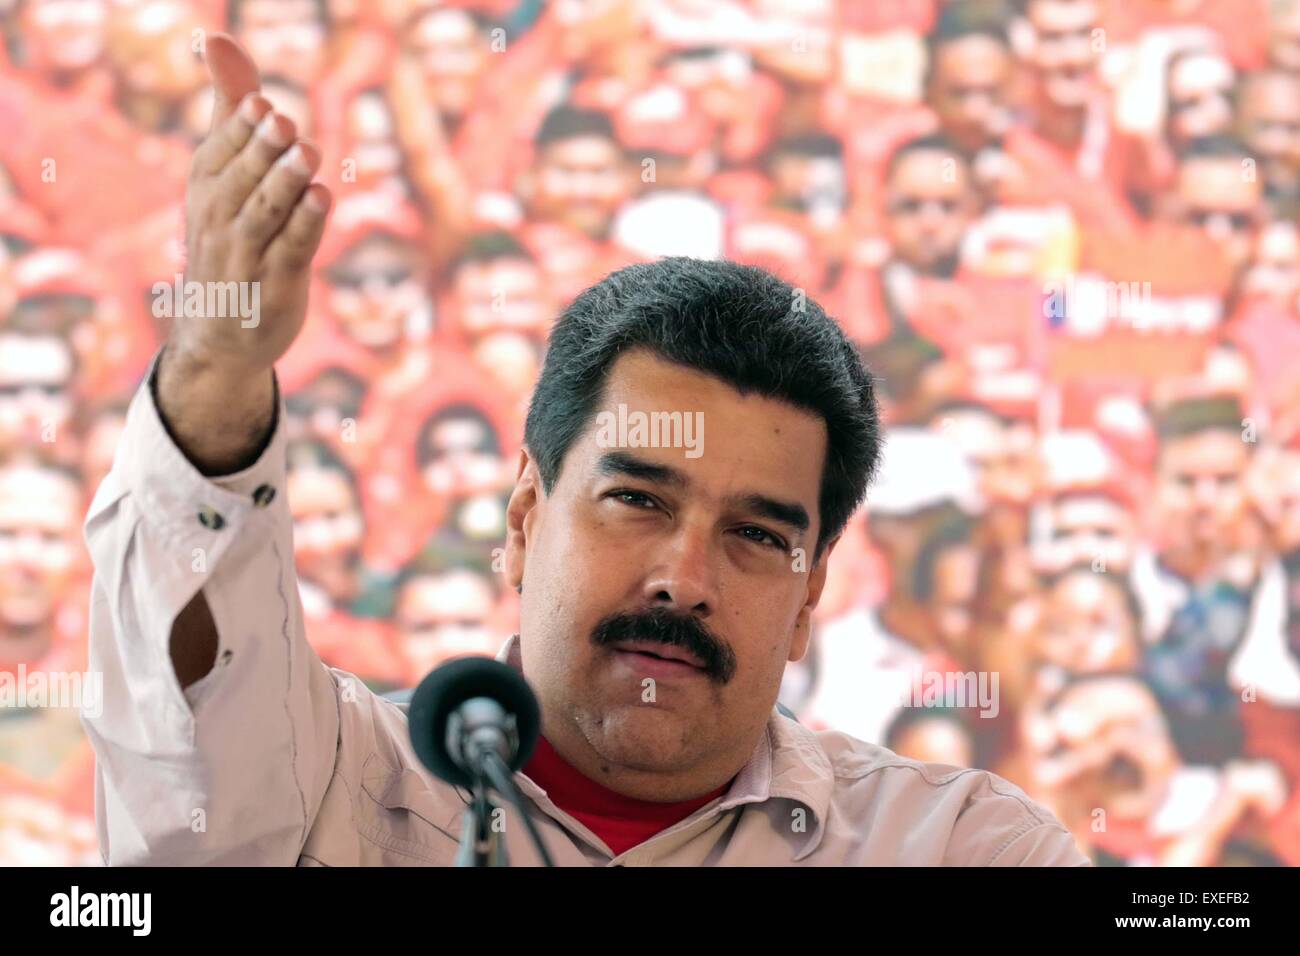 (150802) -- MONAGAS, Aug. 2, 2015 (Xinhua) -- Image provided by Venezuela's Presidency shows Venezuelan President Nicolas Maduro delivering a speech during the meeting with workers of Orinoco Belt, at the Morichal Oilfield, state of Monagas, Venezuela, on Aug. 1, 2015. According to local press, Maduro praised on Saturday the Orinoco Belt as the most important project for the economic future and the integral development of Venezuela with a production of 1,326,000 daily barrels of oil, during a day of work in the Morichal Oilfield concerning the plan of the relaunch and repositioning of the plan Stock Photo